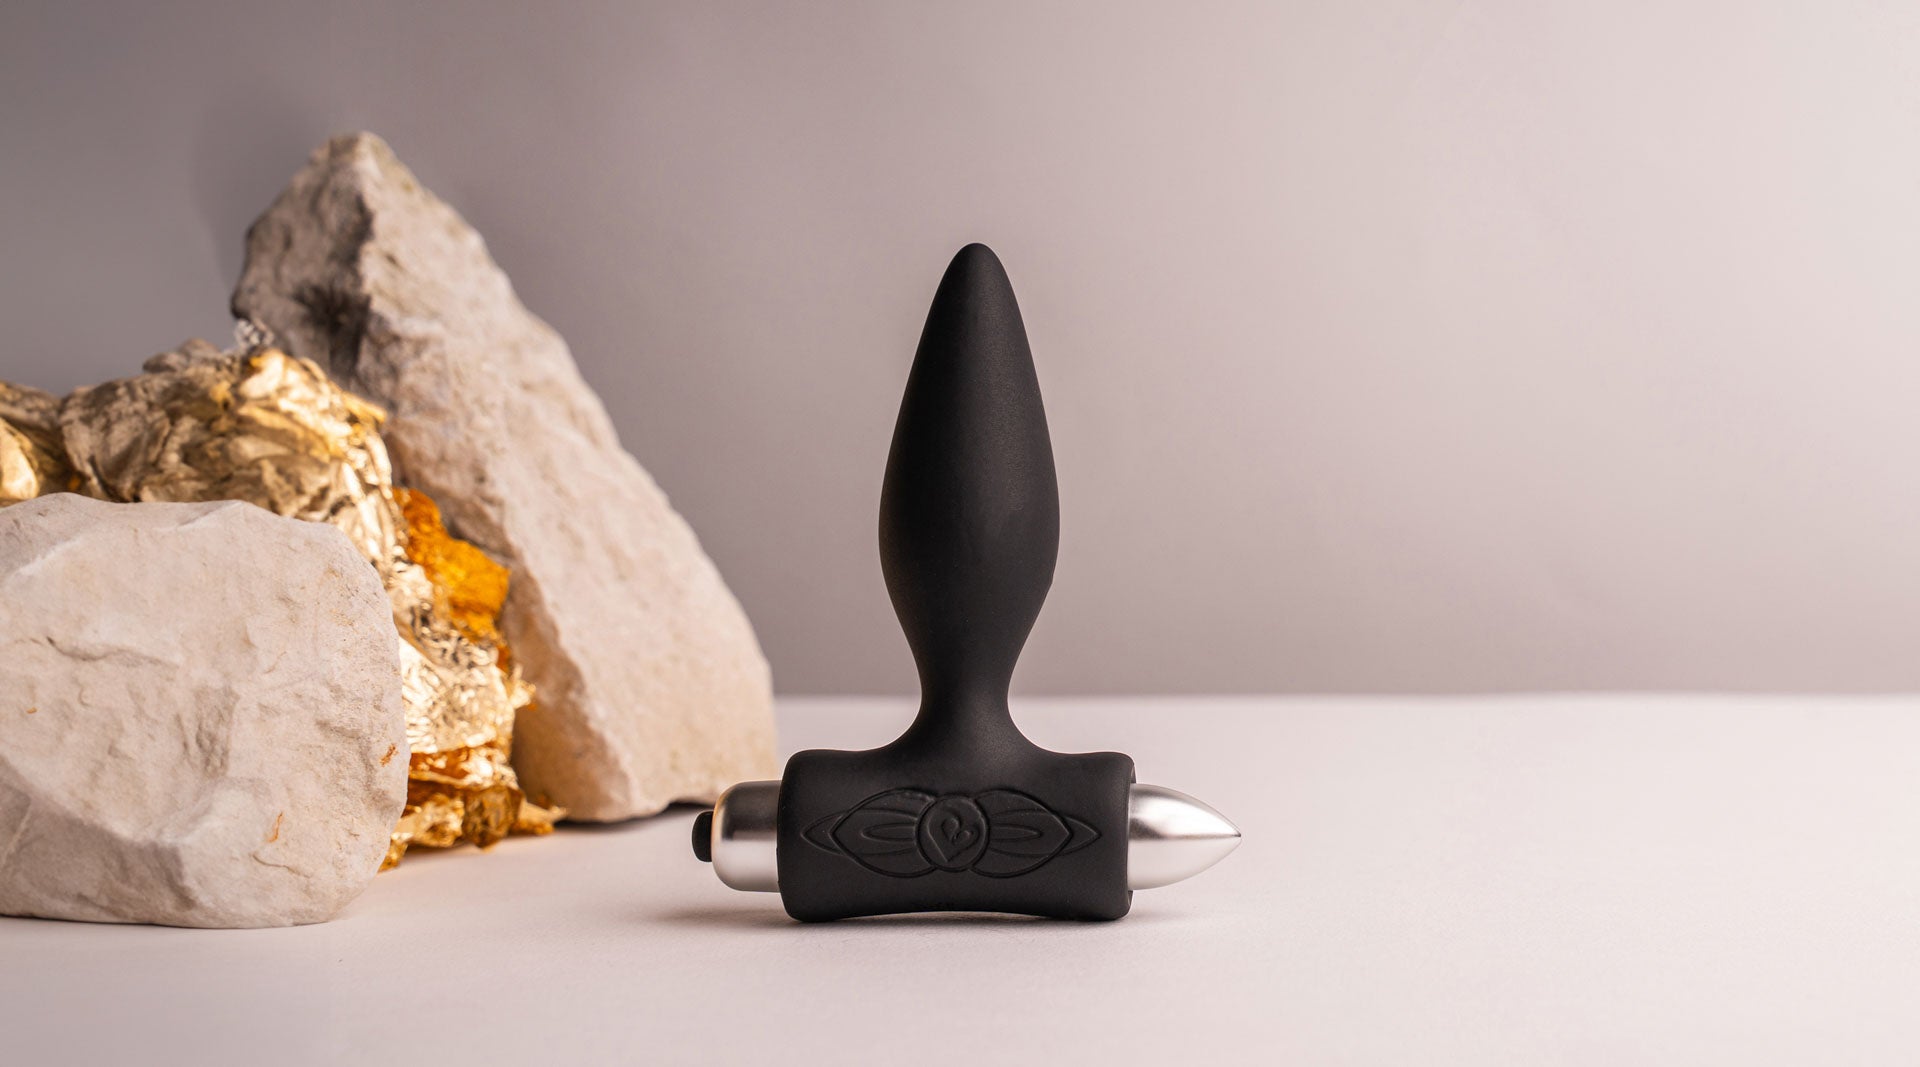 Black silicone tapered tip butt plug housing a removable bullet vibrator.